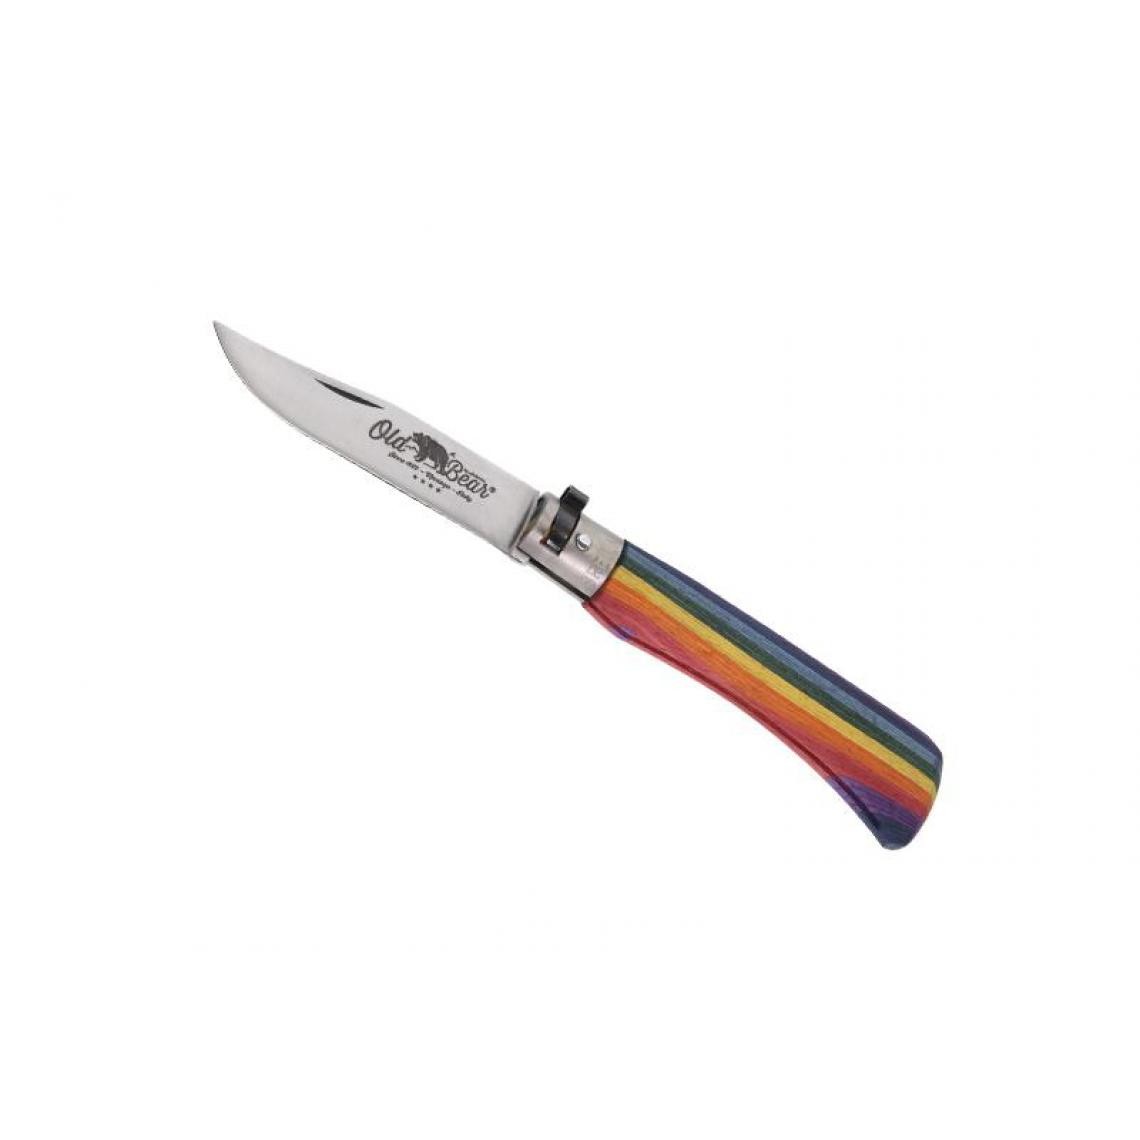 Divers Marques - OLD BEAR - 313.M - COUTEAU OLD BEAR RAINBOW TAILLE M - Outils de coupe